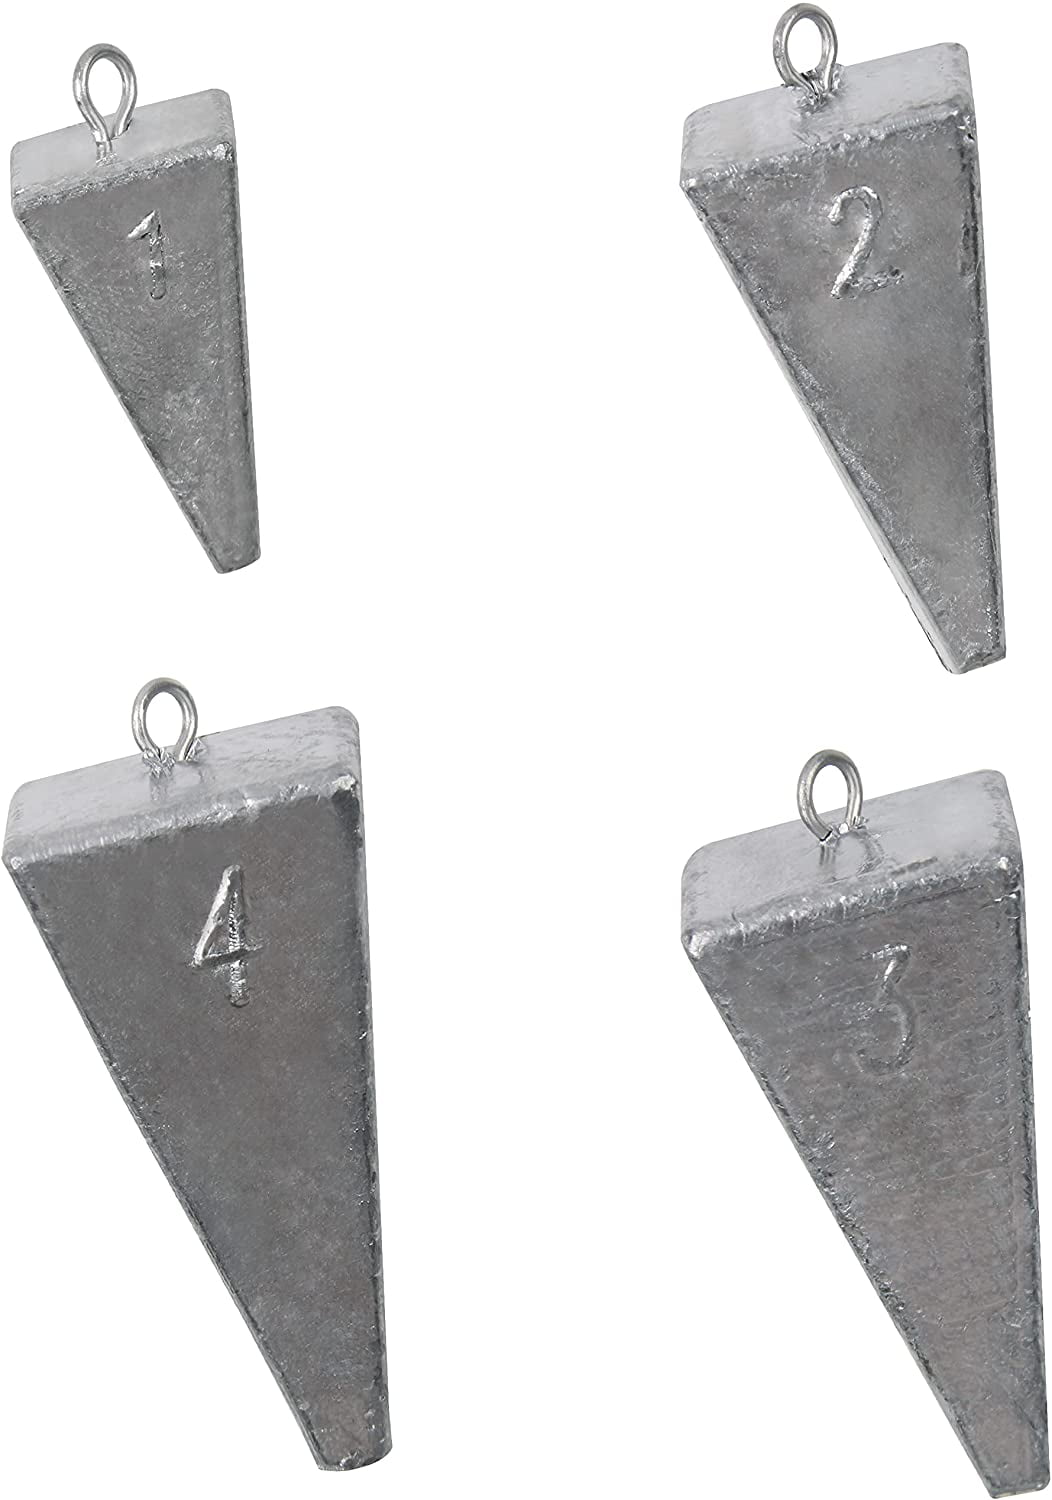 Pyramid Sinkers Fishing Weights,Fishing Sinker for Saltwater